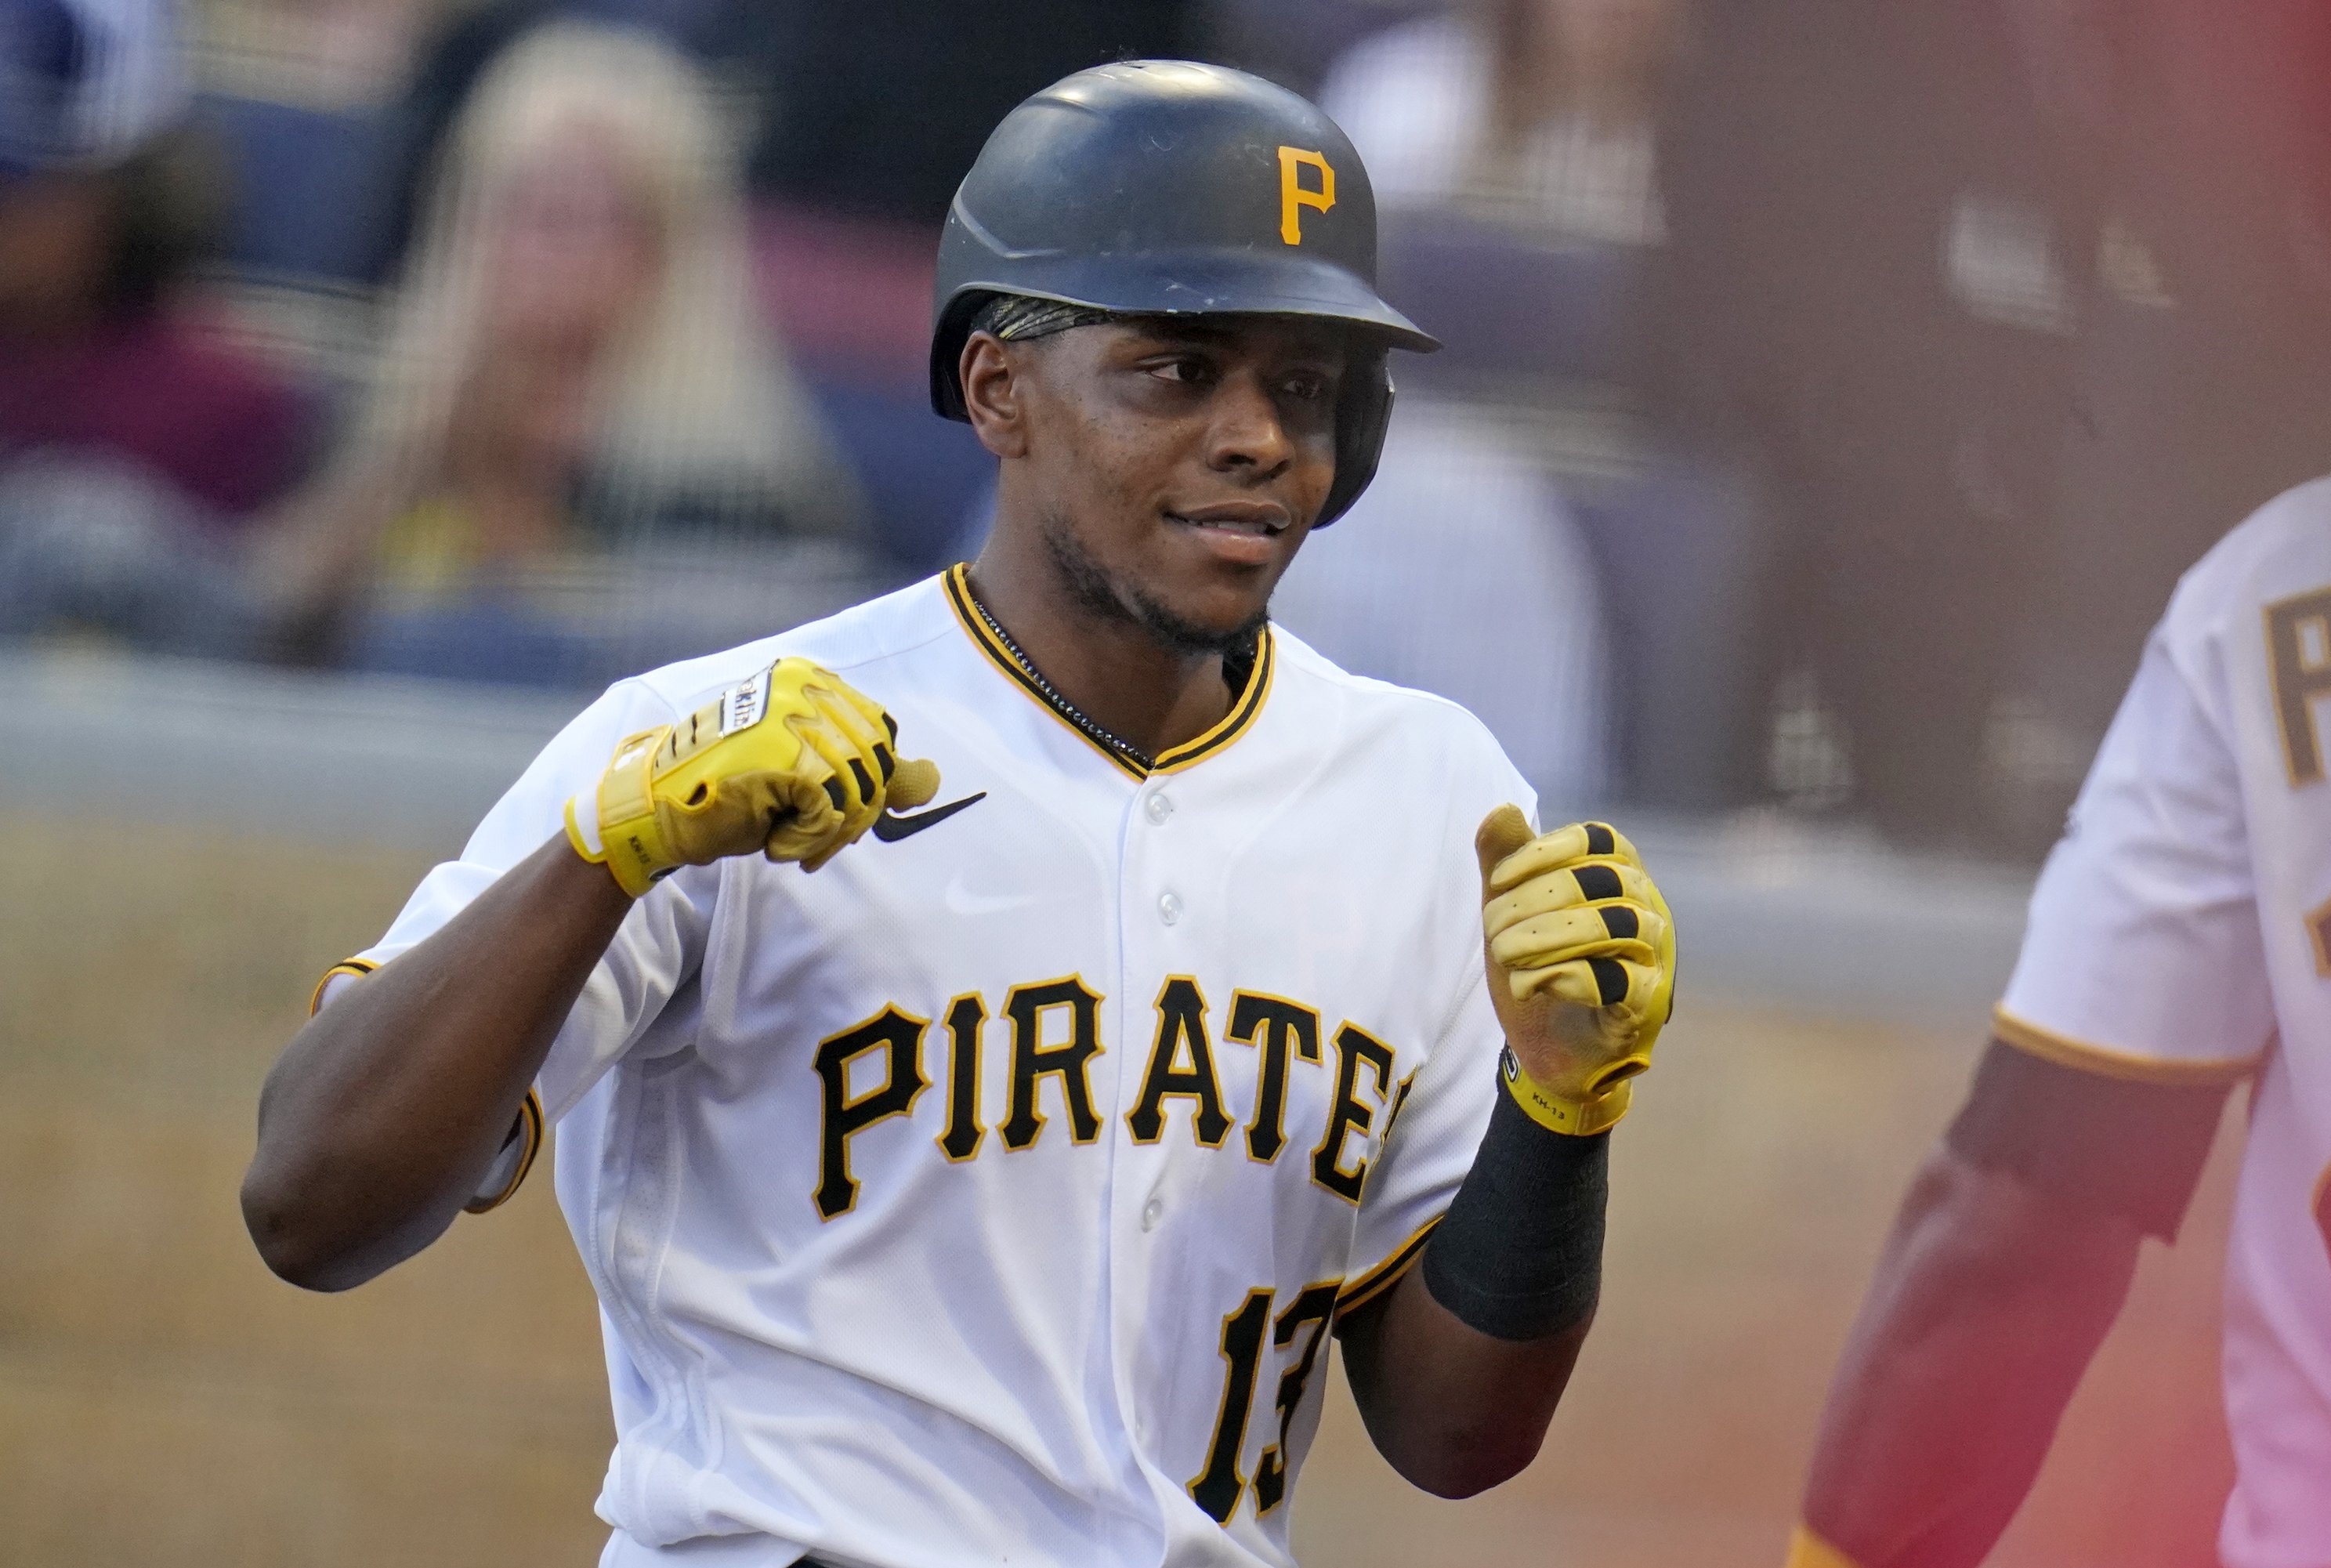 Ke'Bryan Hayes reflects on Year 1 with Pirates and the expectation